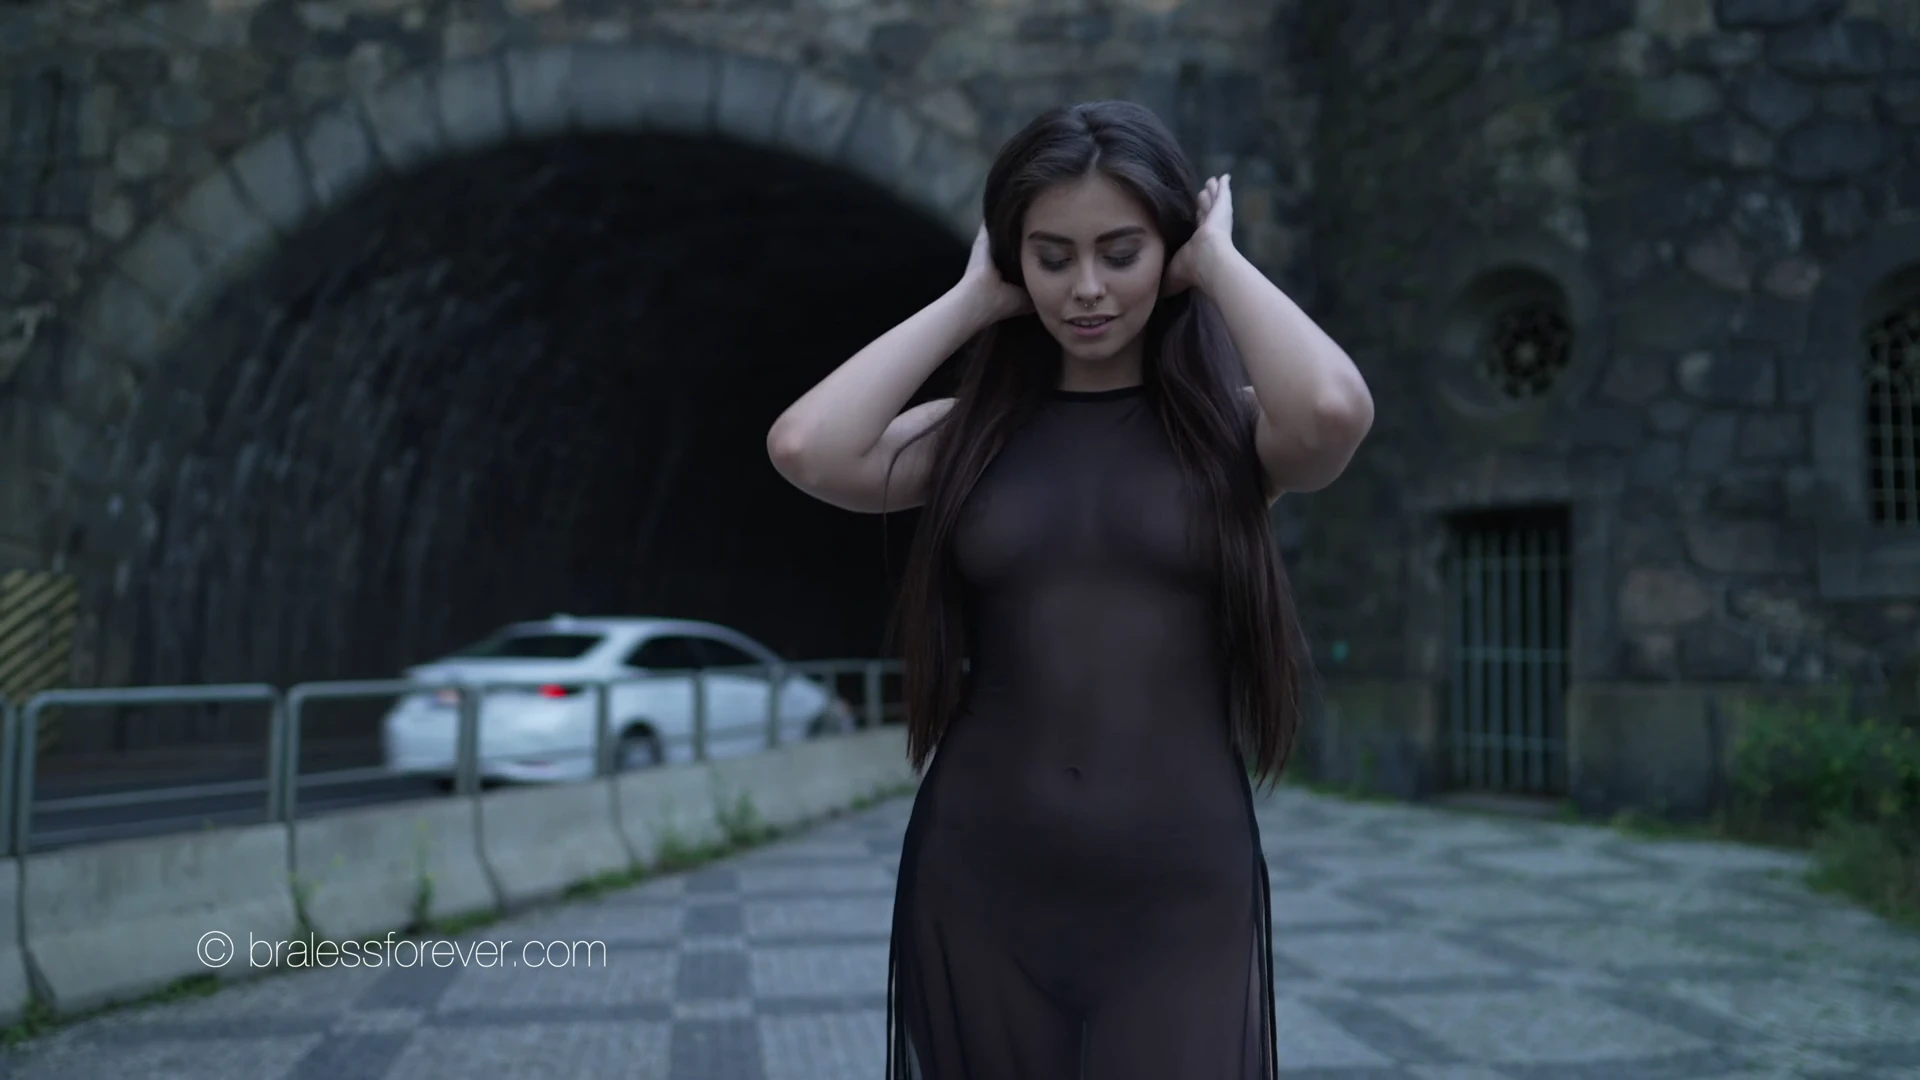 Alissa in her Black Sheer Dress. Full Vid dropped today.. come watch!